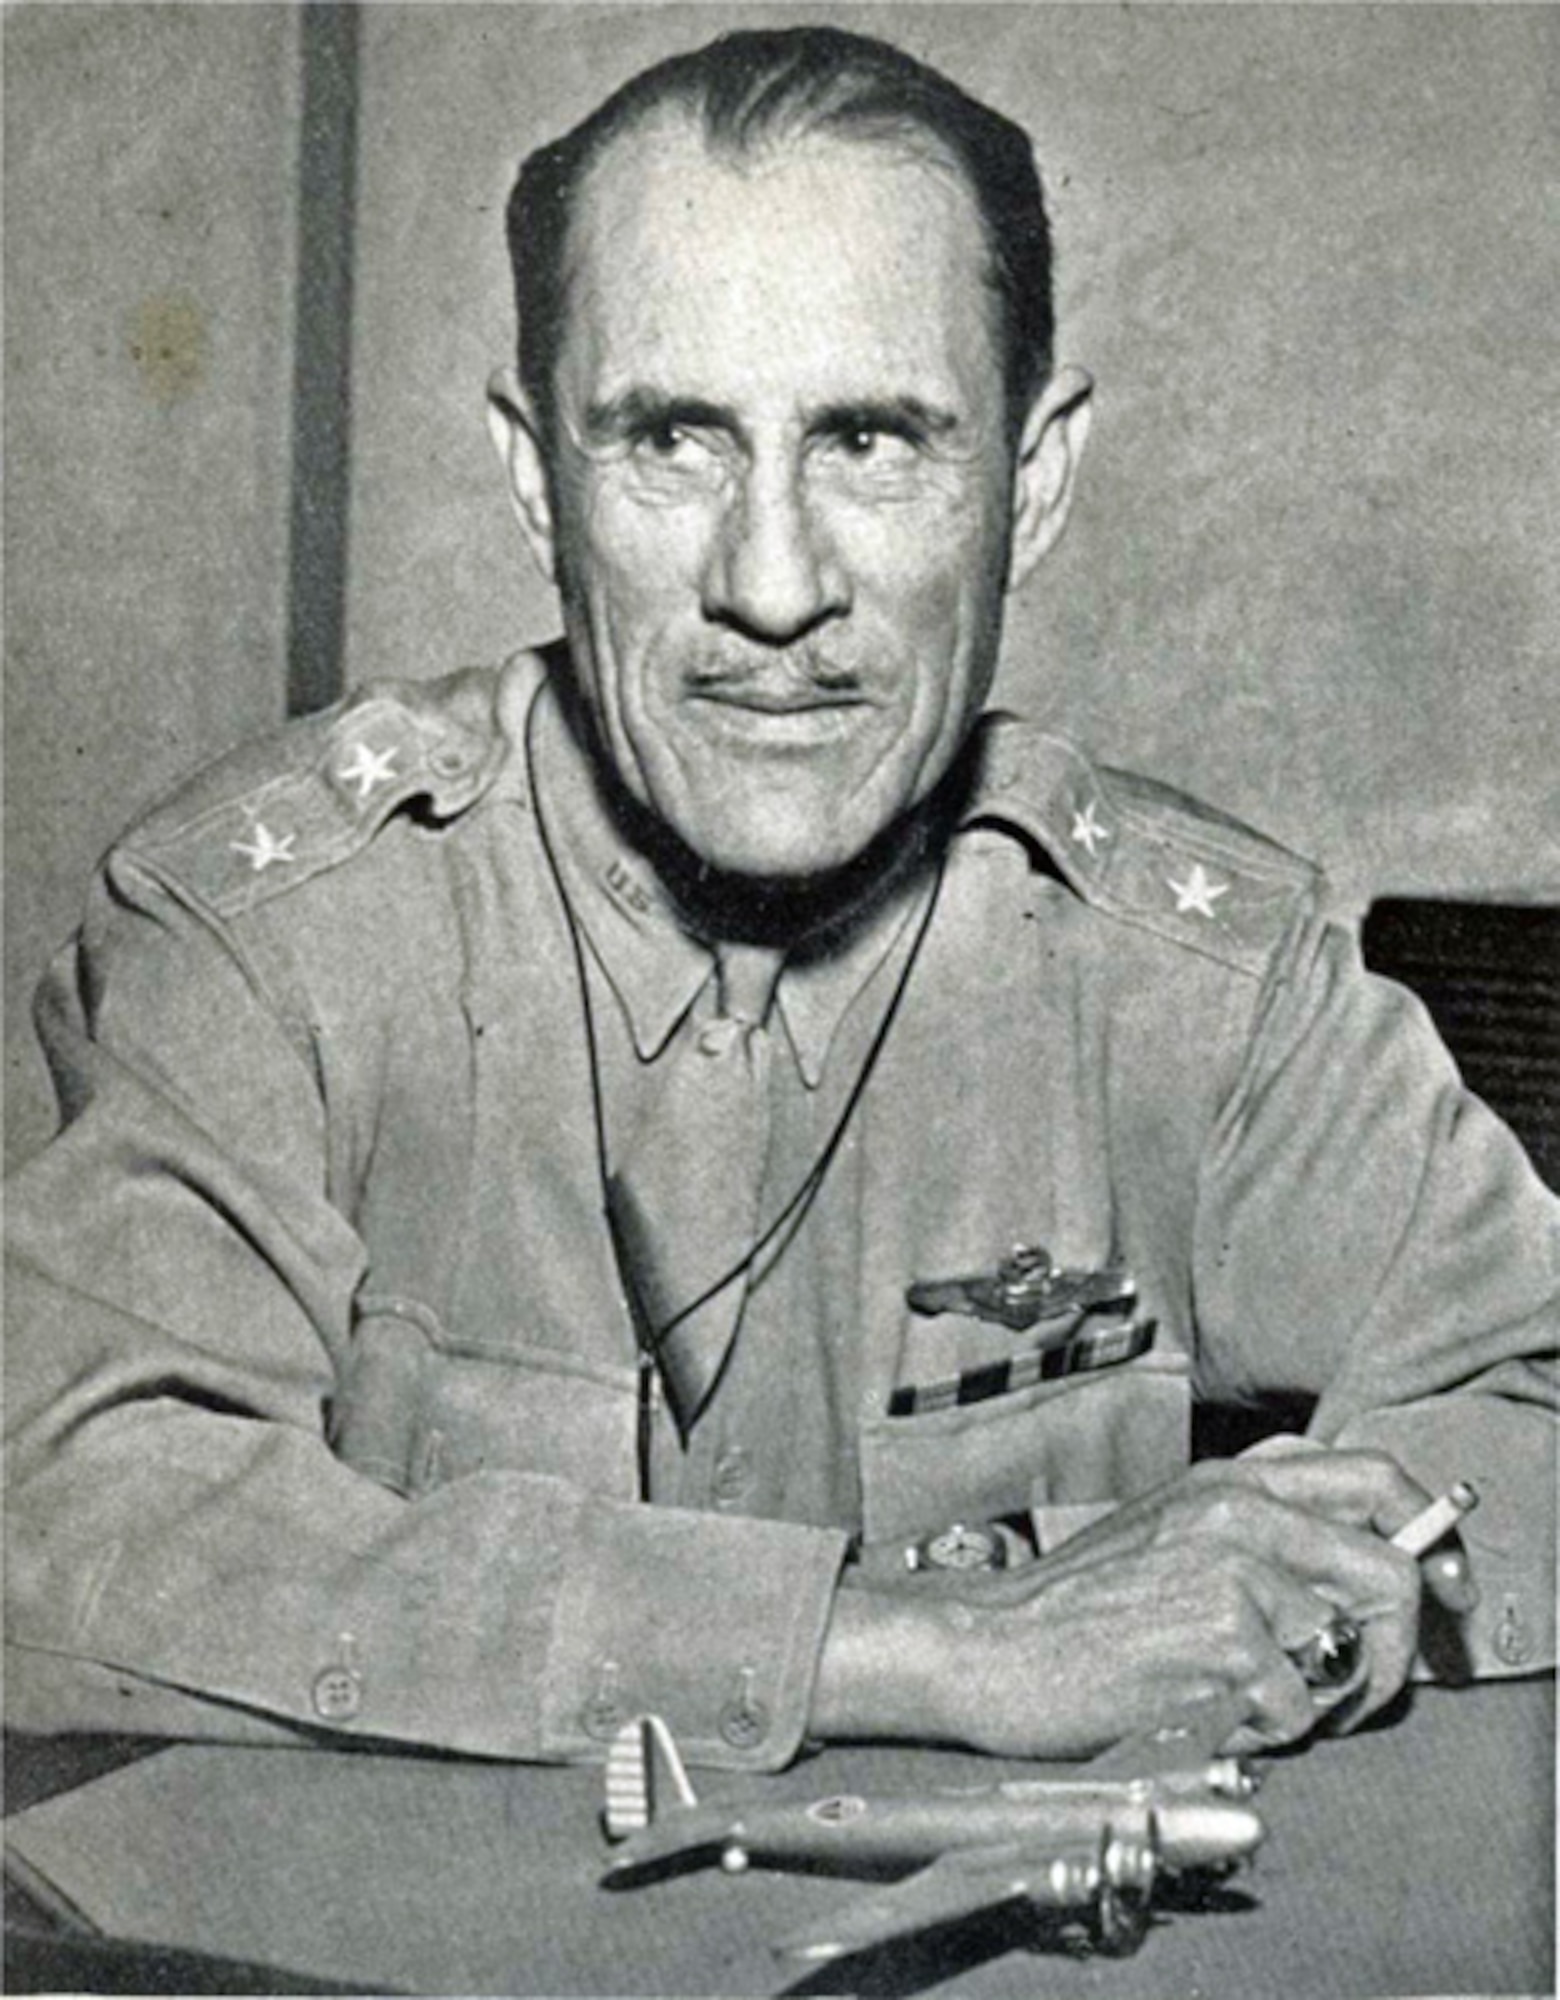 Maj. Gen. Clarence L. Tinker was the first American general to die in World War II. He was the first Native American in U.S. Army history to attain the rank of major general. Tinker Air Force Base, Oklahoma is named in his honor. He was a member of the Osage Nation. (Courtesy Photo)